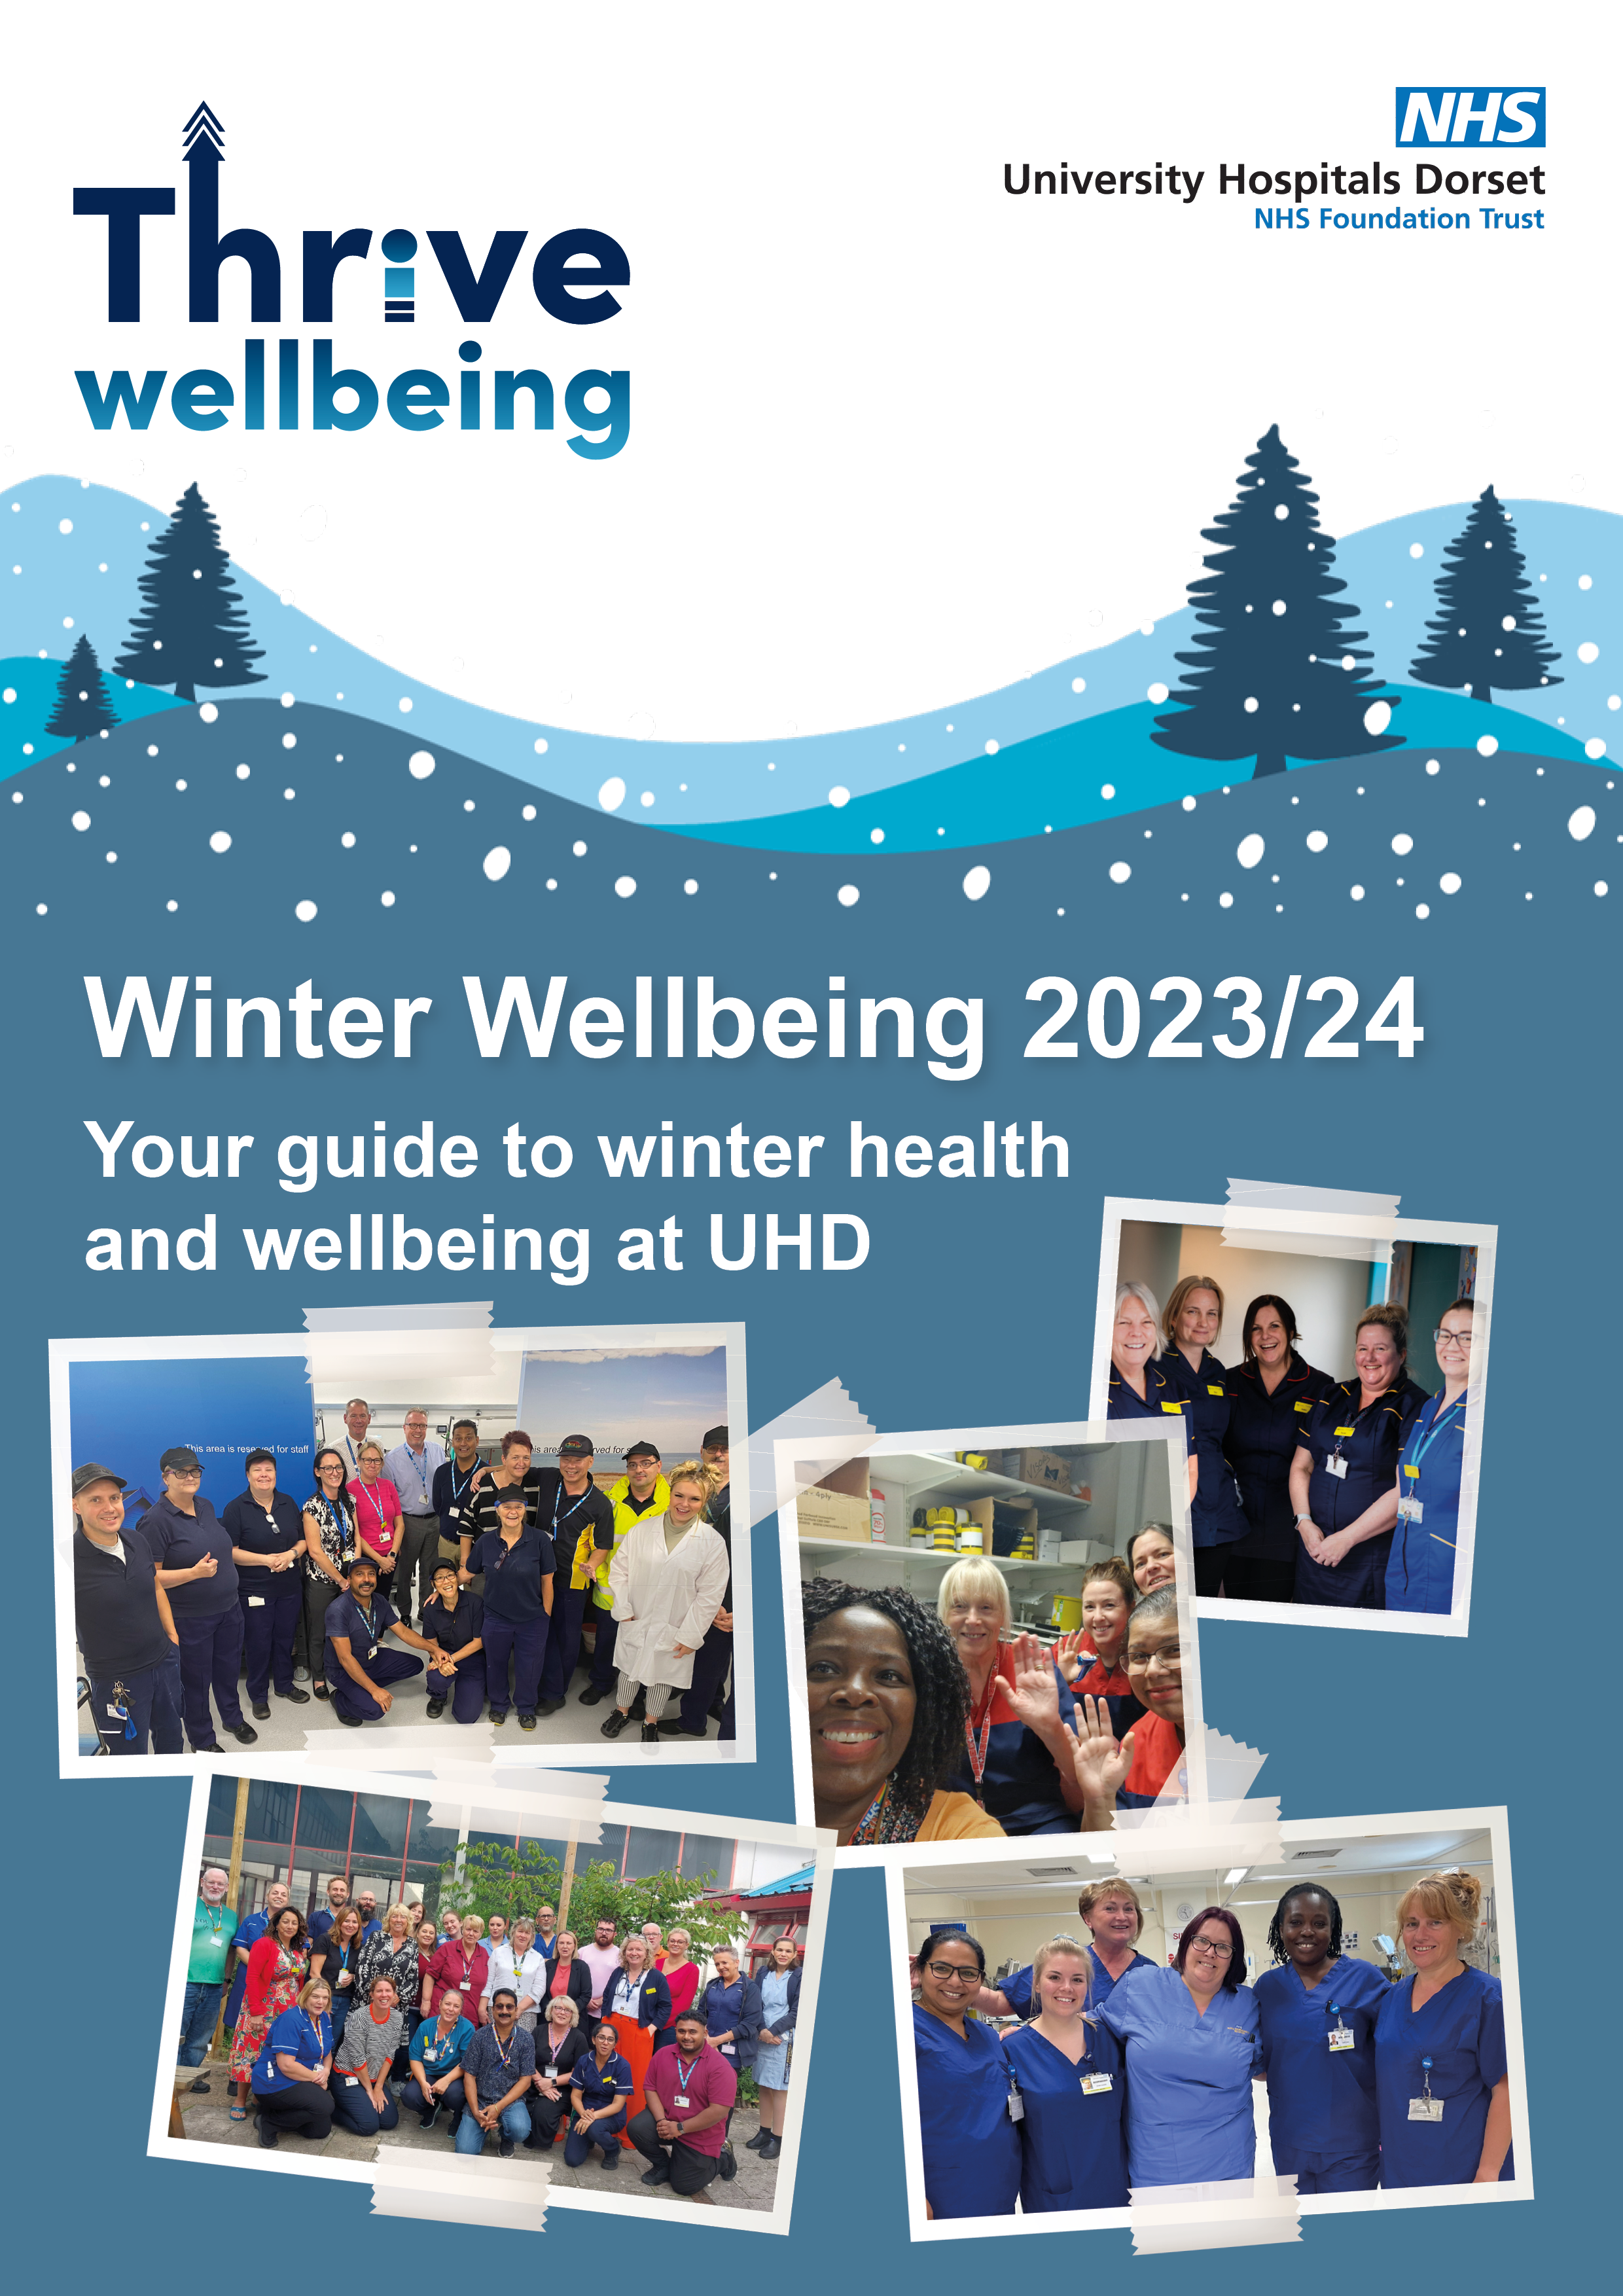 winter wellbeing guide for staff 2023